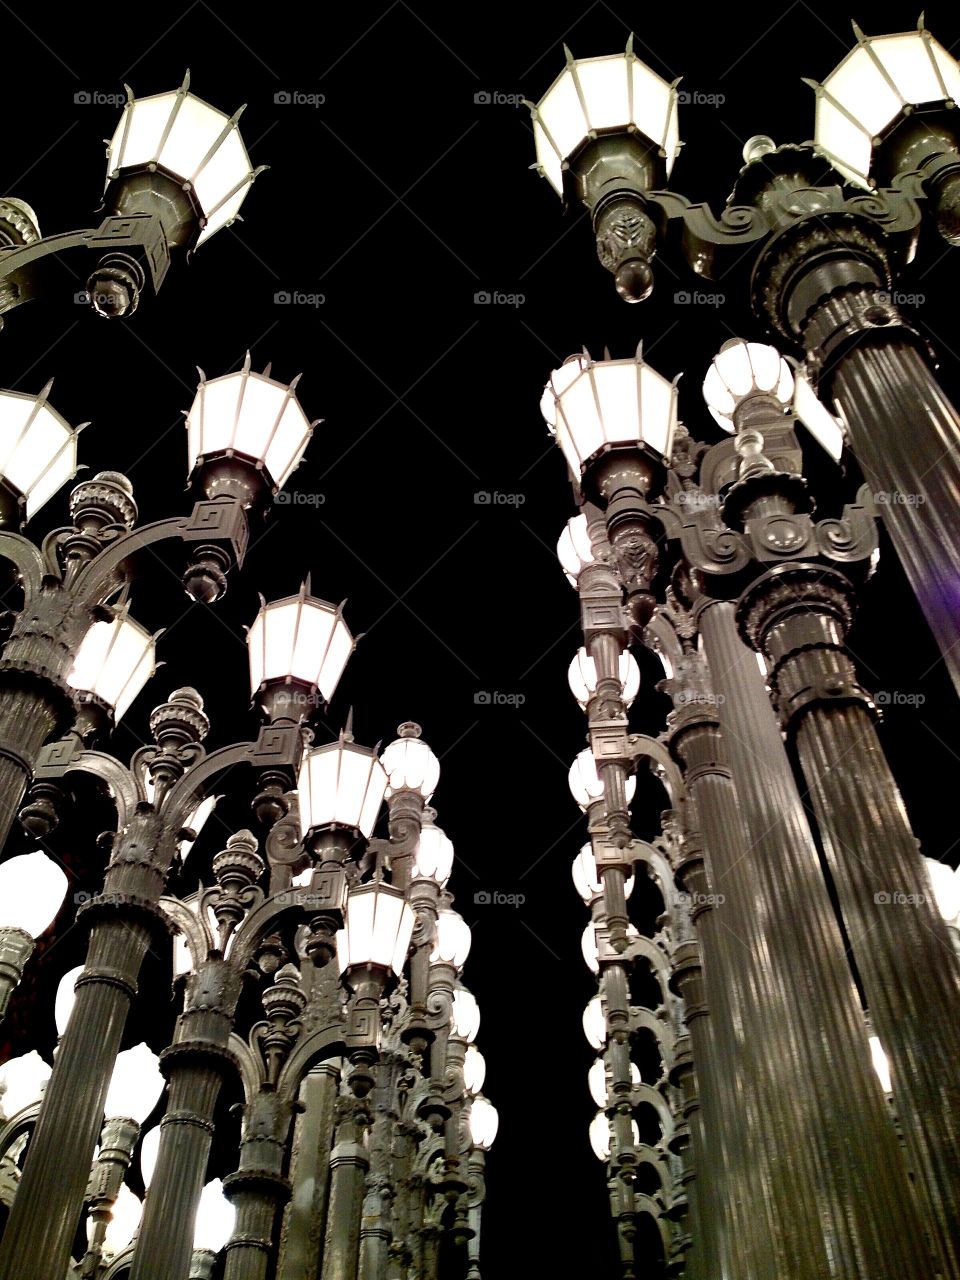 Urban Light at LACMA. 202 restored street lamps from the 1920s and 1930s  is an entry way to Los Angeles County Museum of Art. 